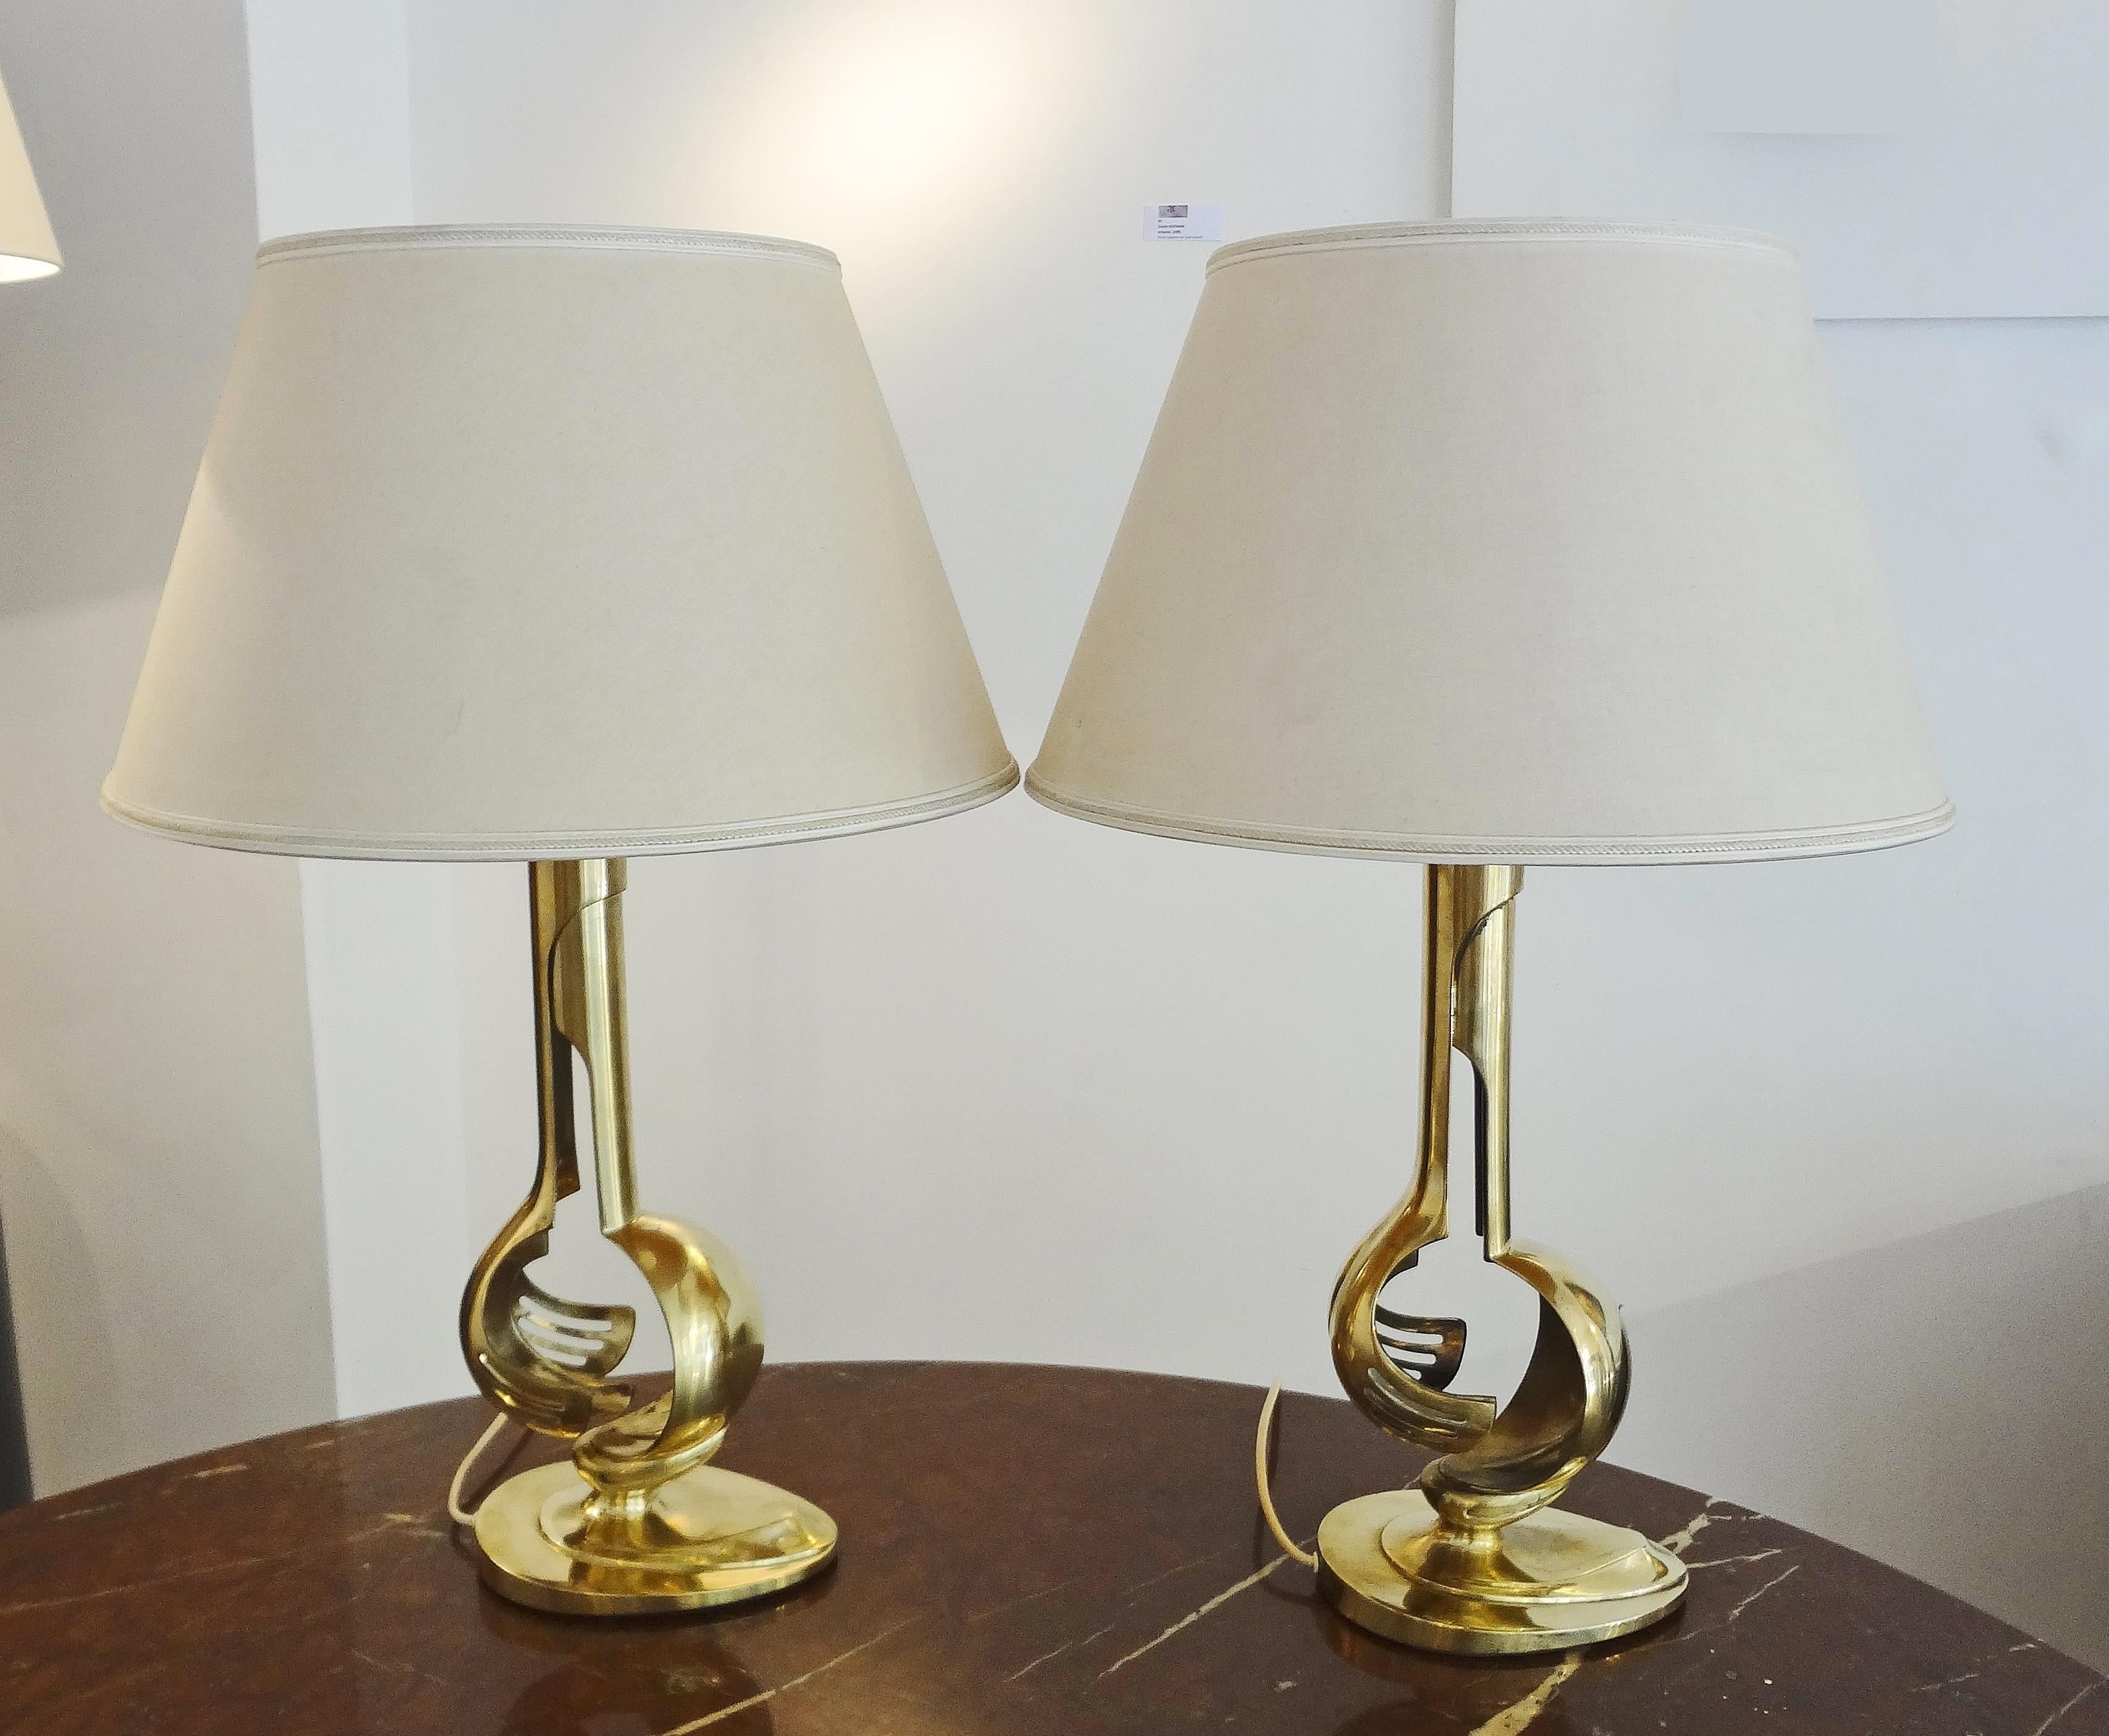 Lovely pair of gilt brass table lamps, Italy, 1980s.
Vintage beige fabric shade.
Measures: Base H 46 x L 15 x 20 cm.
 